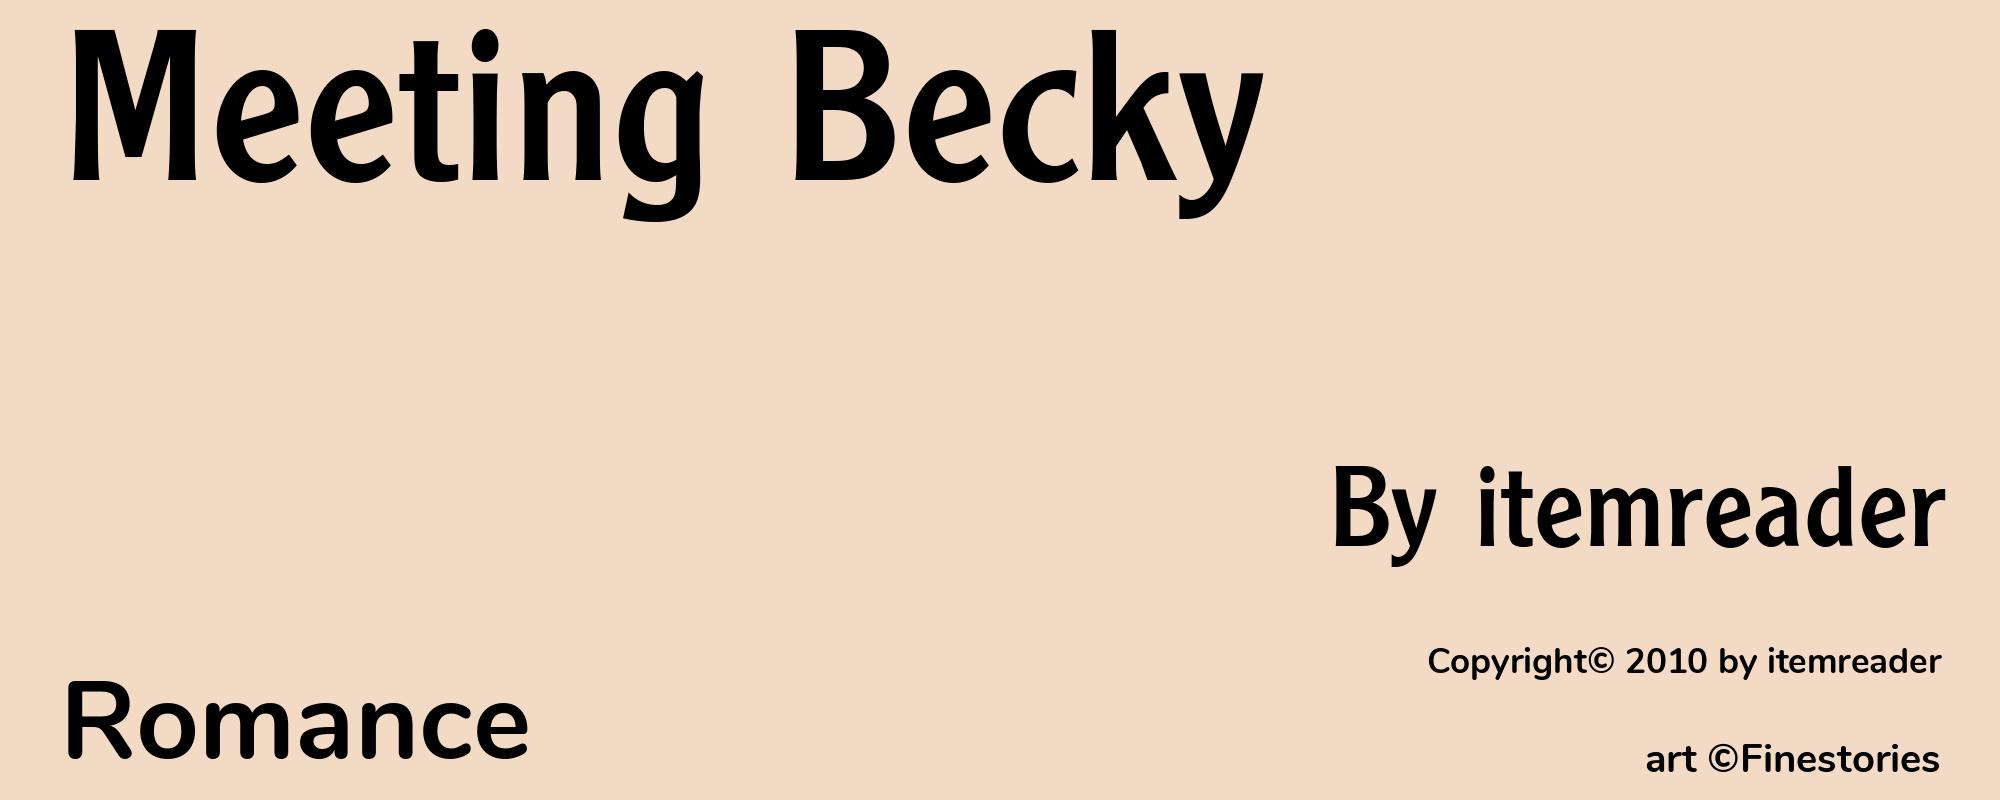 Meeting Becky - Cover